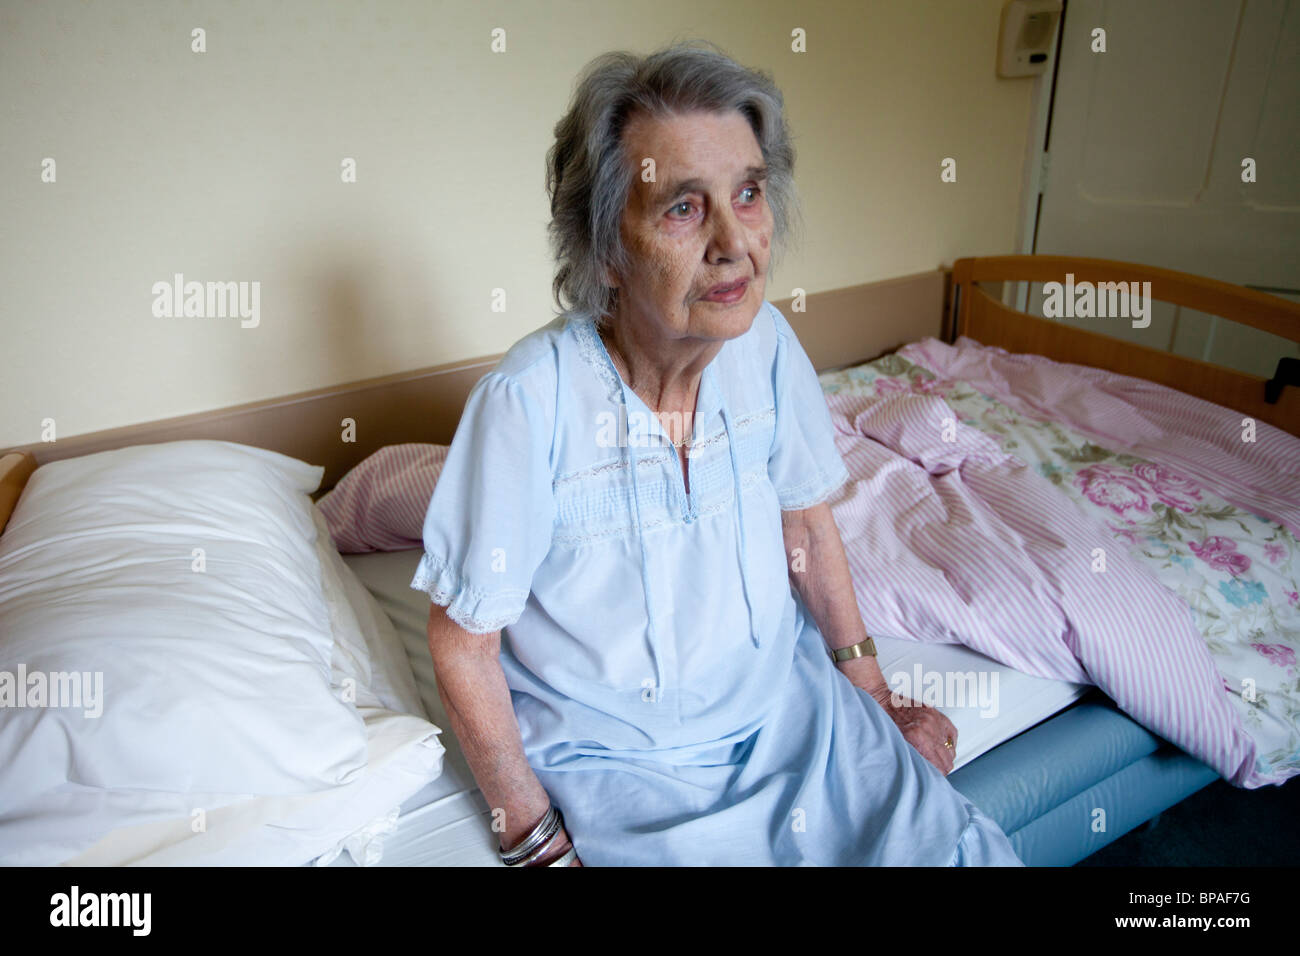 Elderly woman in a care home Stock Photo